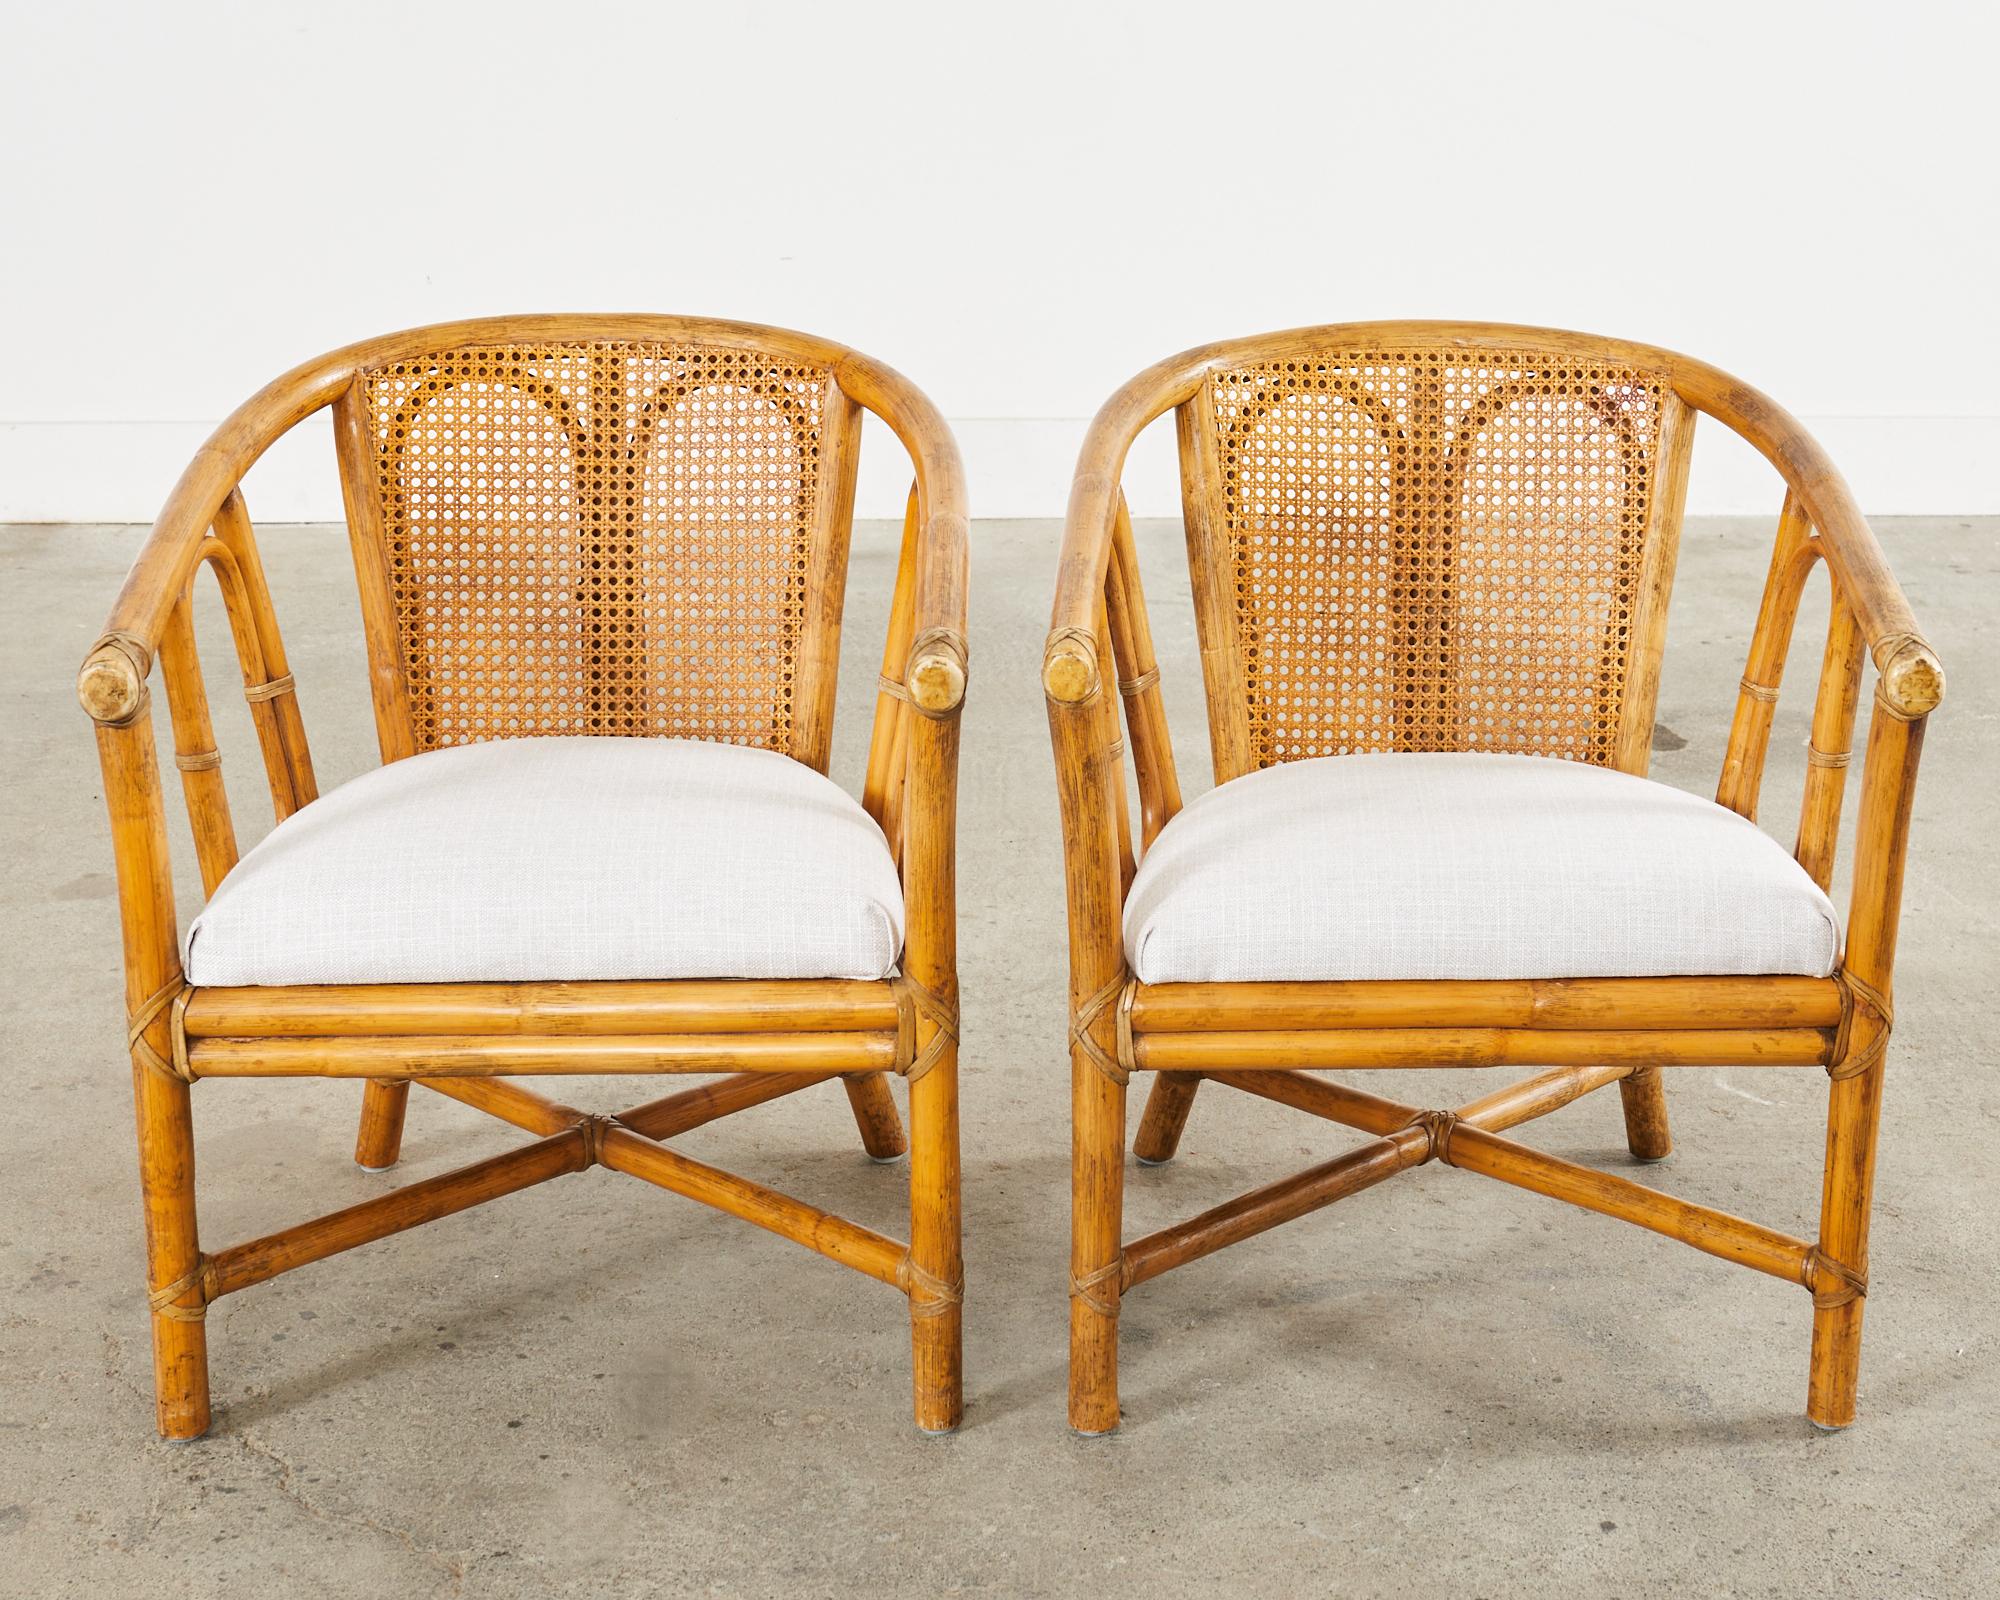 Hand-Crafted Pair of McGuire Organic Modern Style Rattan Cane Barrel Lounge Chairs For Sale